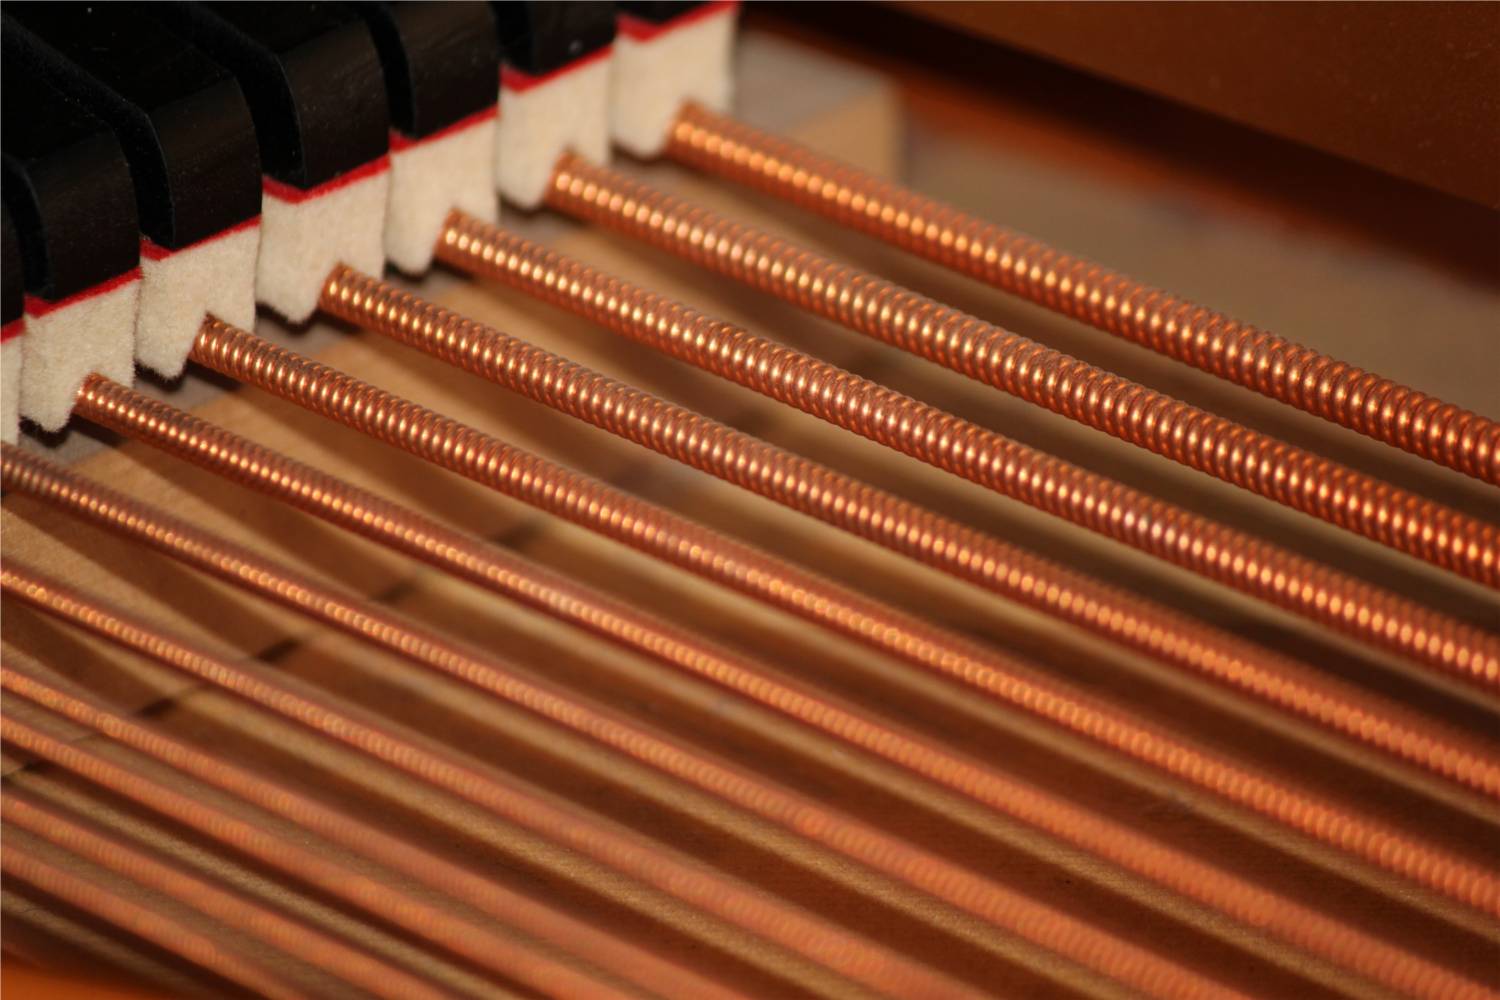 The dampers and lower strings of the same piano.